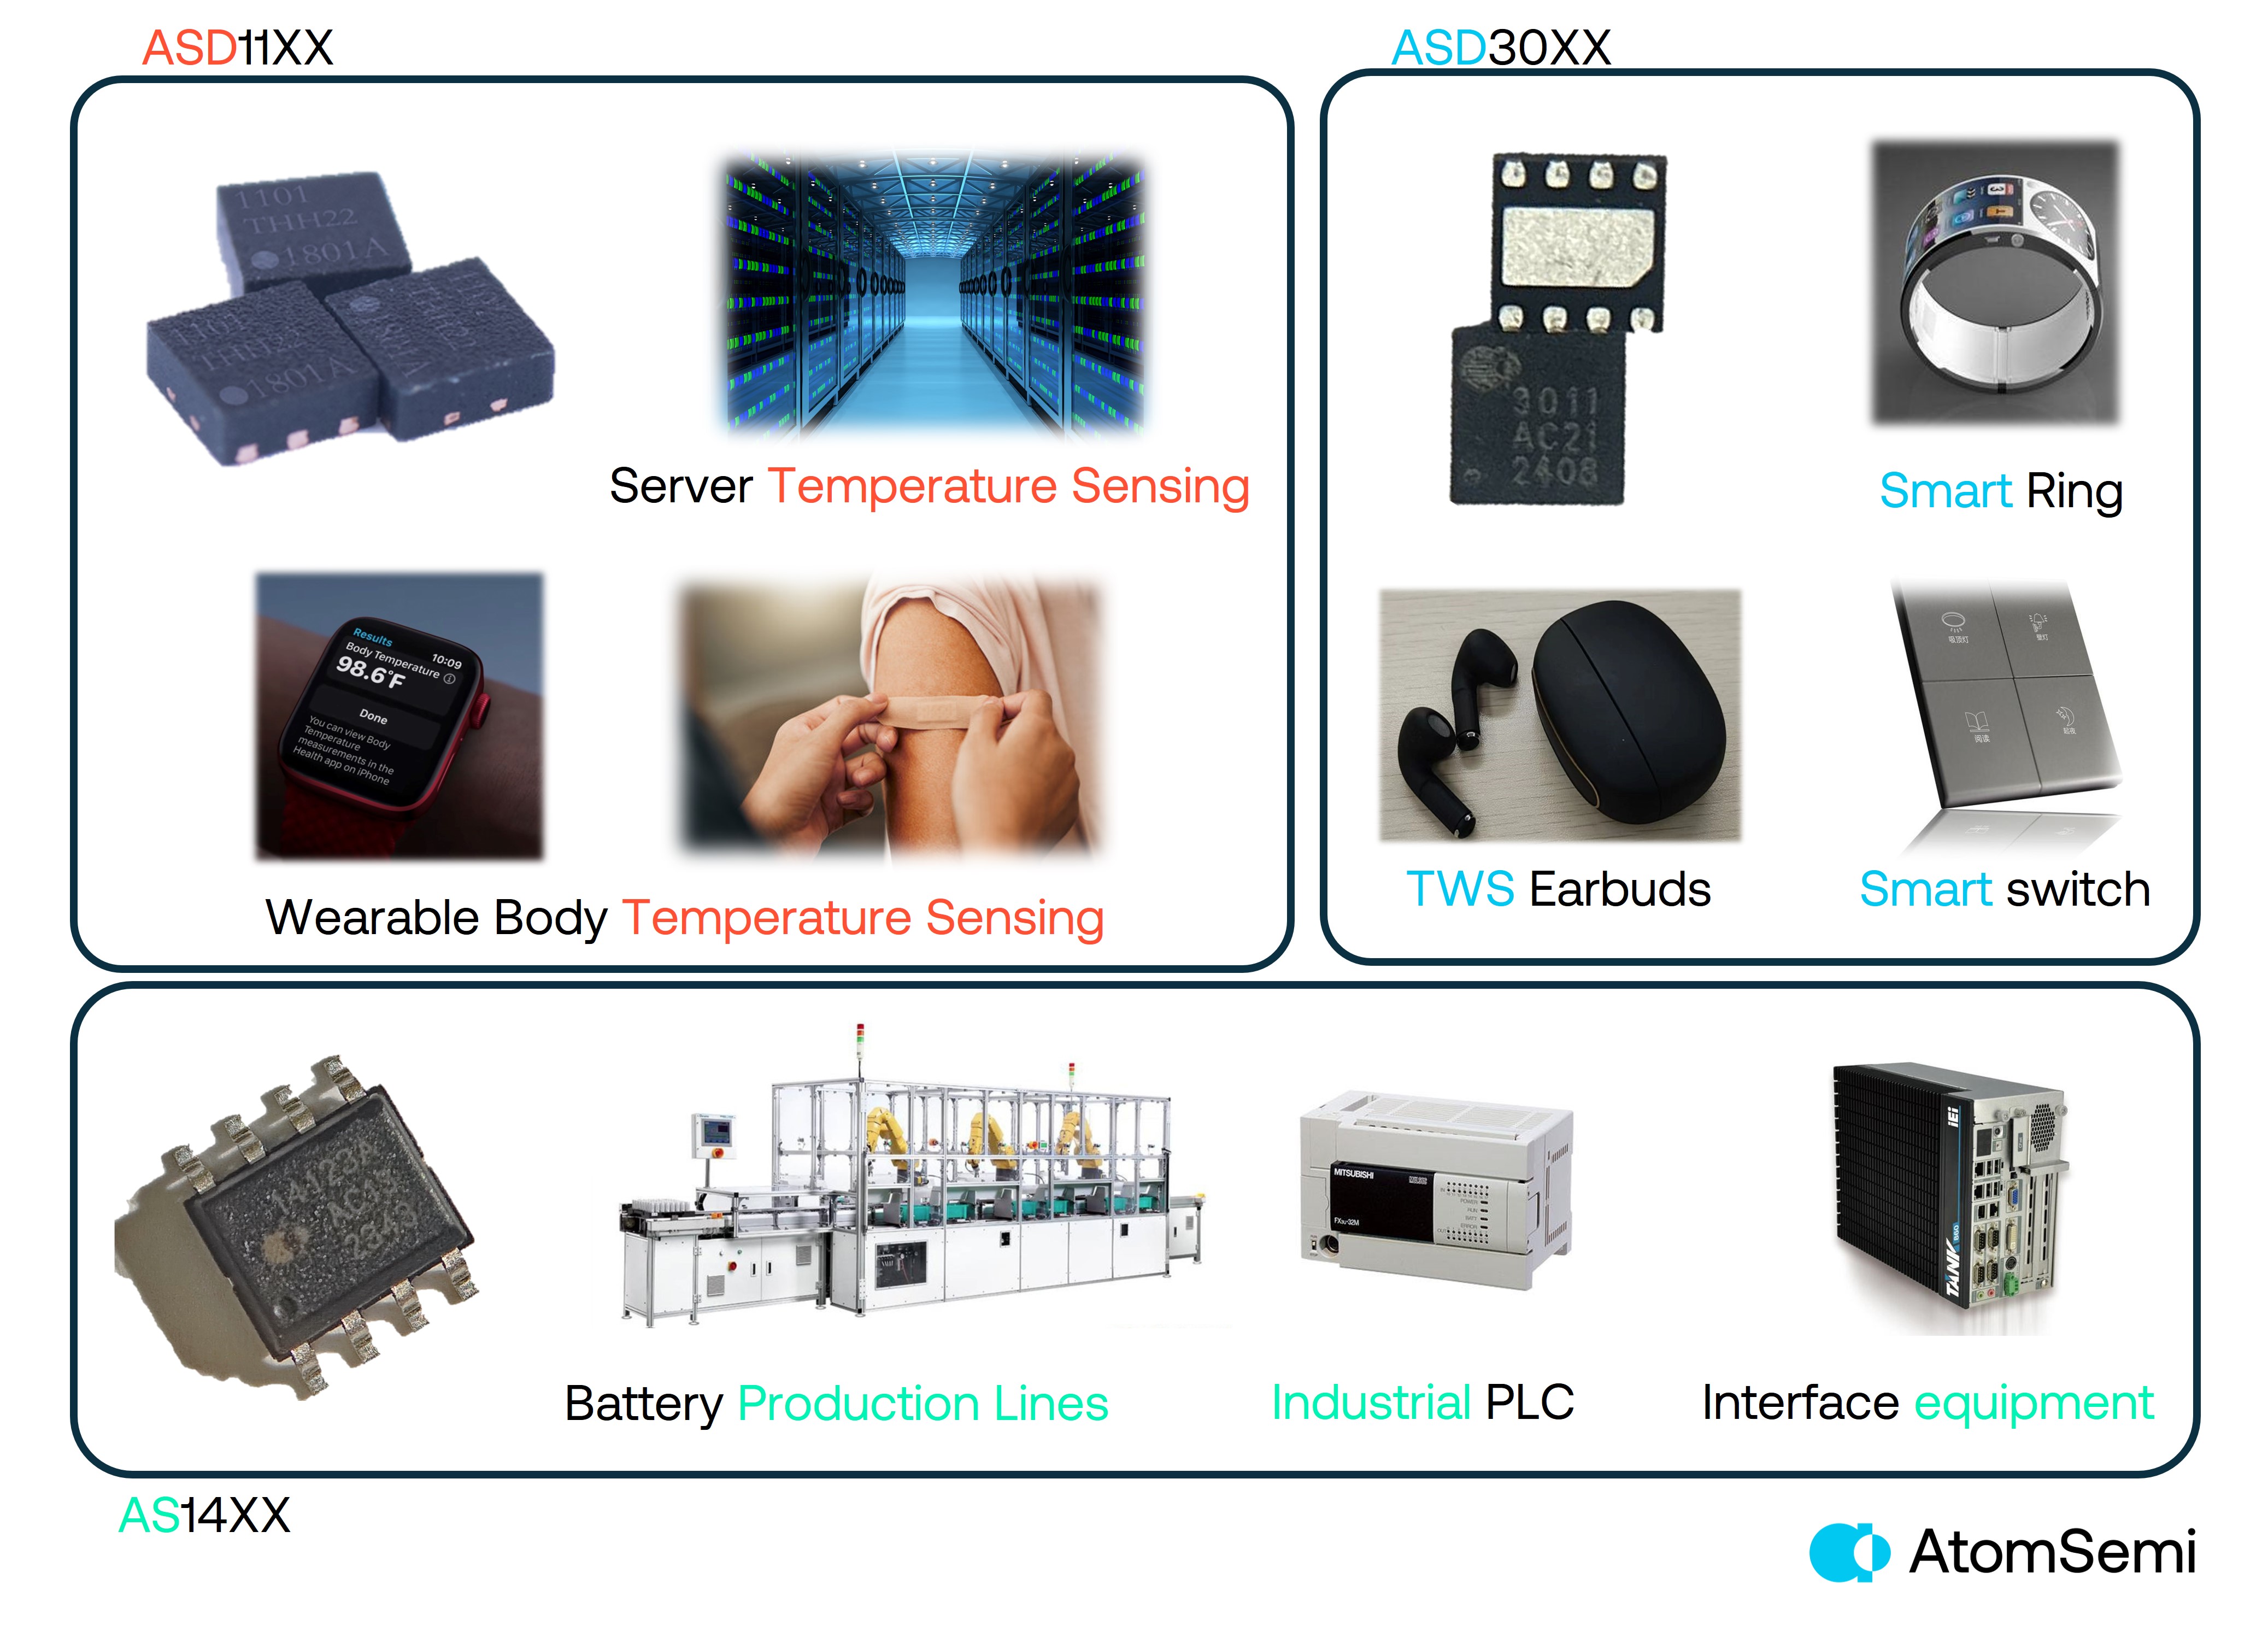 The three series of smart ubiquitous chips developed by Prof. George Jie Yuan’s team have a wide range of applications, perfect for integrating into wearable devices, consumer electronics, industrial electronics, smart home products, and even for use in the Internet of Things (IoT).